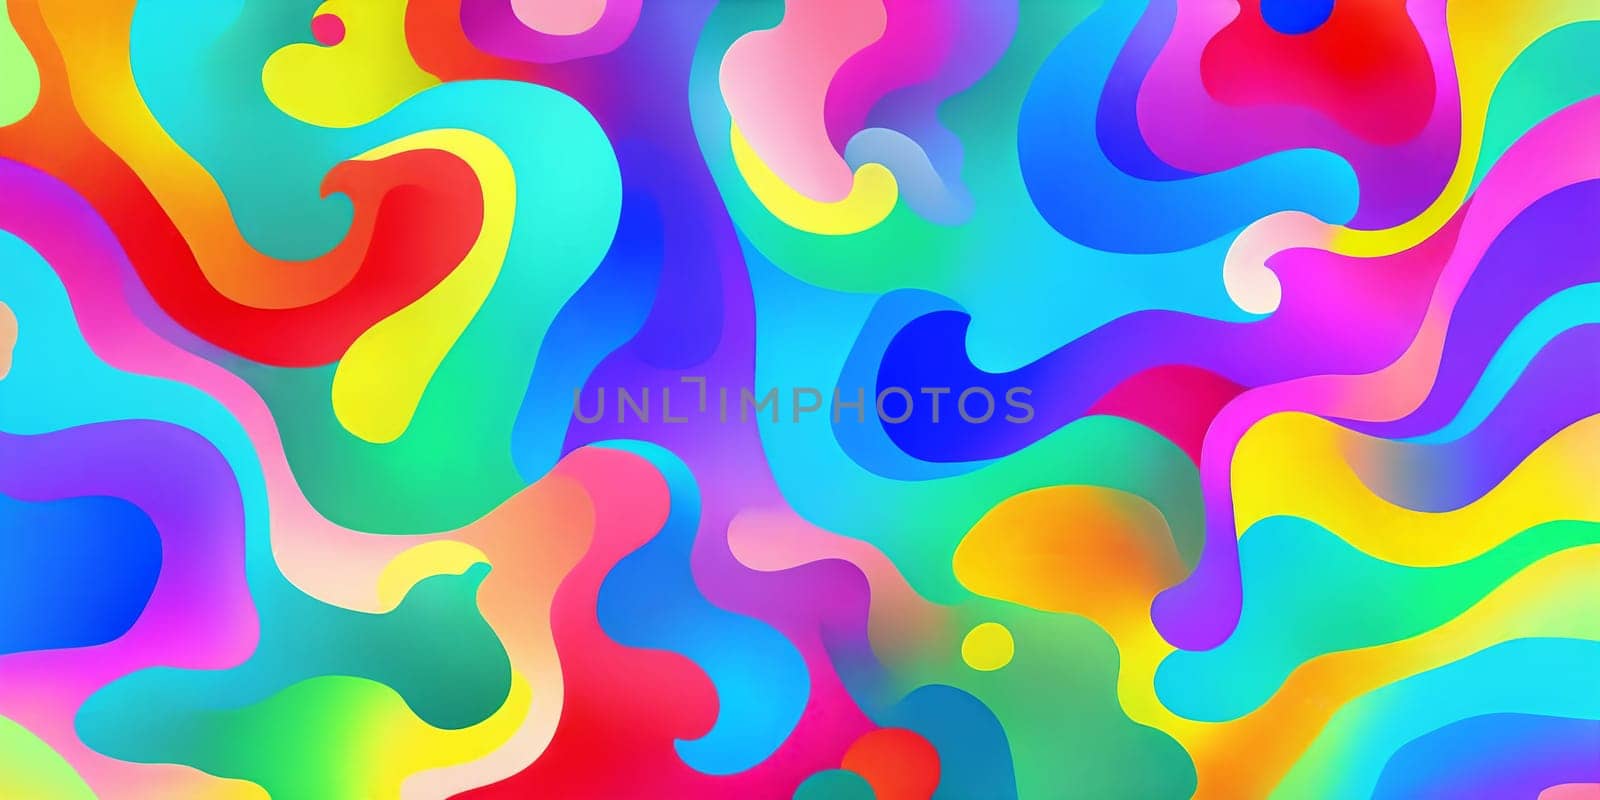 Visually breathtaking abstract compositions using digital techniques for vibrant patterns inspired by technology and innovation.